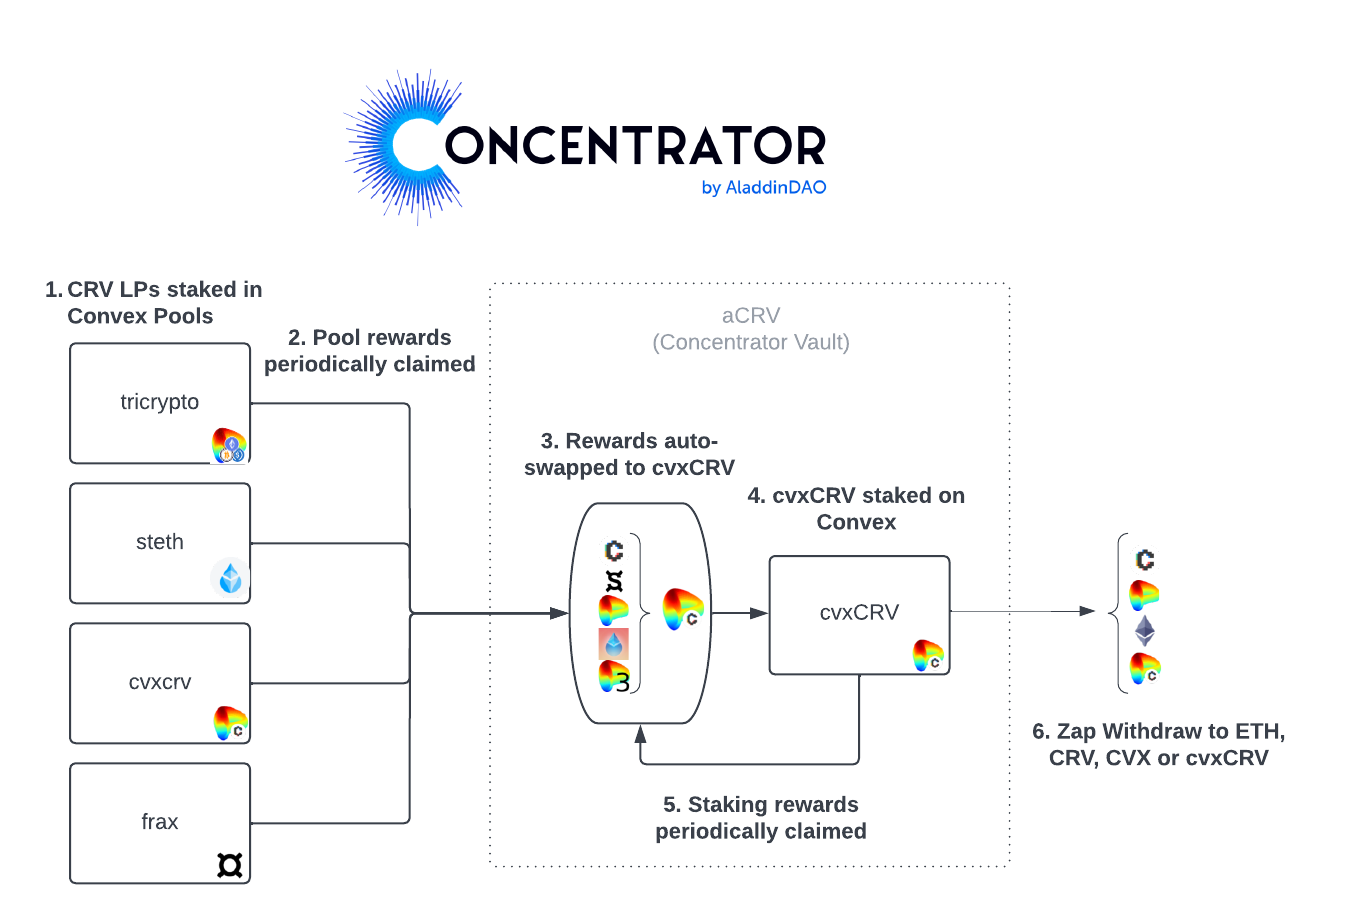 Here's the usual Concentrator flow diagram expanded and clarified a little. 